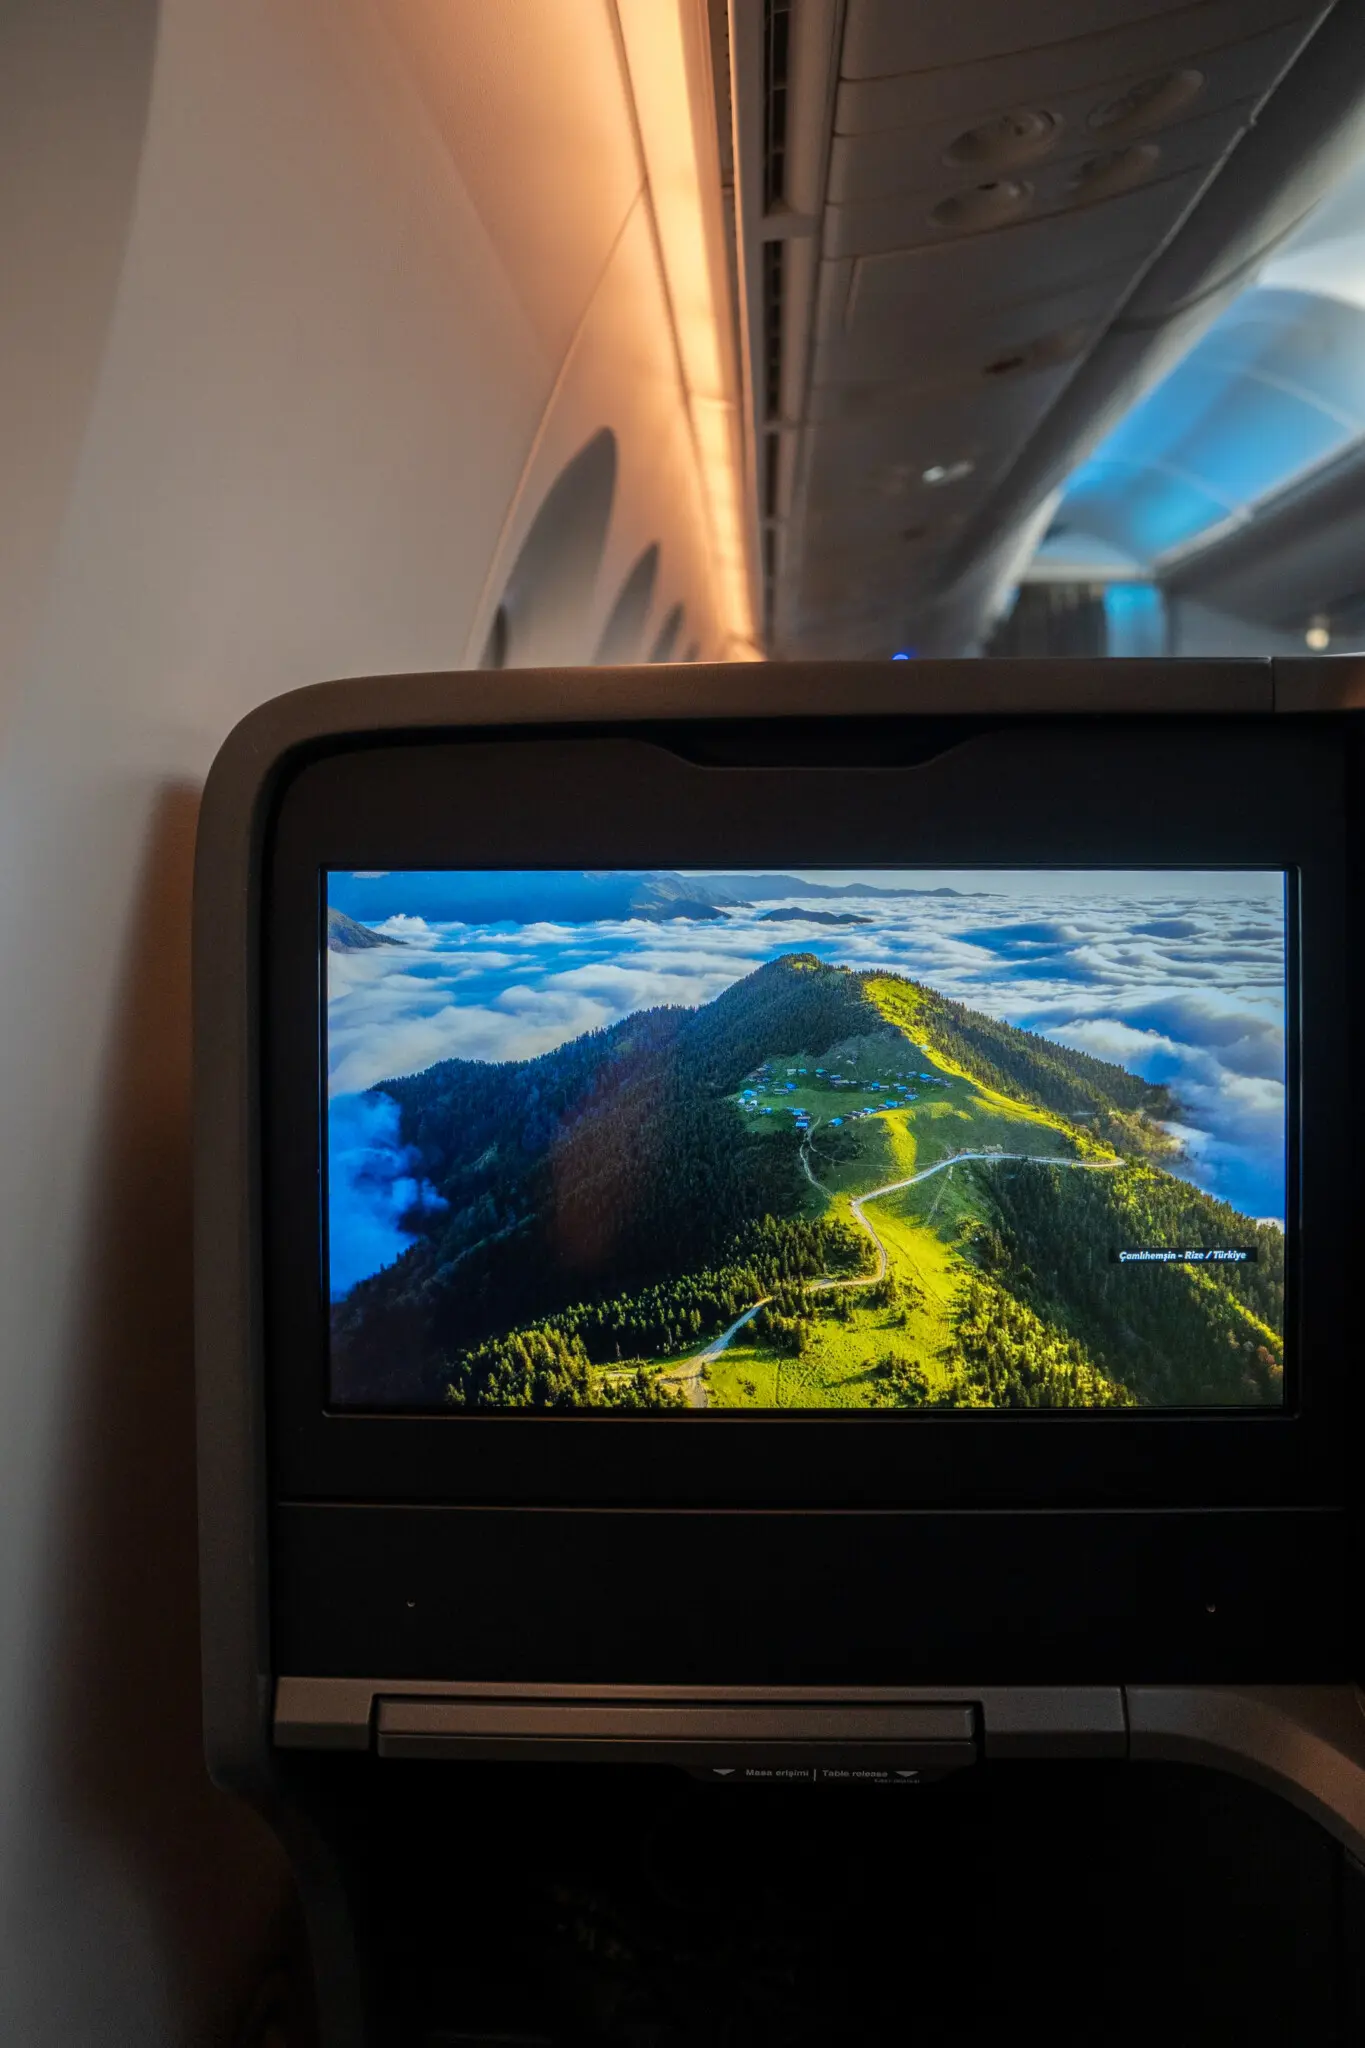 Monitore in der Turkish Airlines Business Class